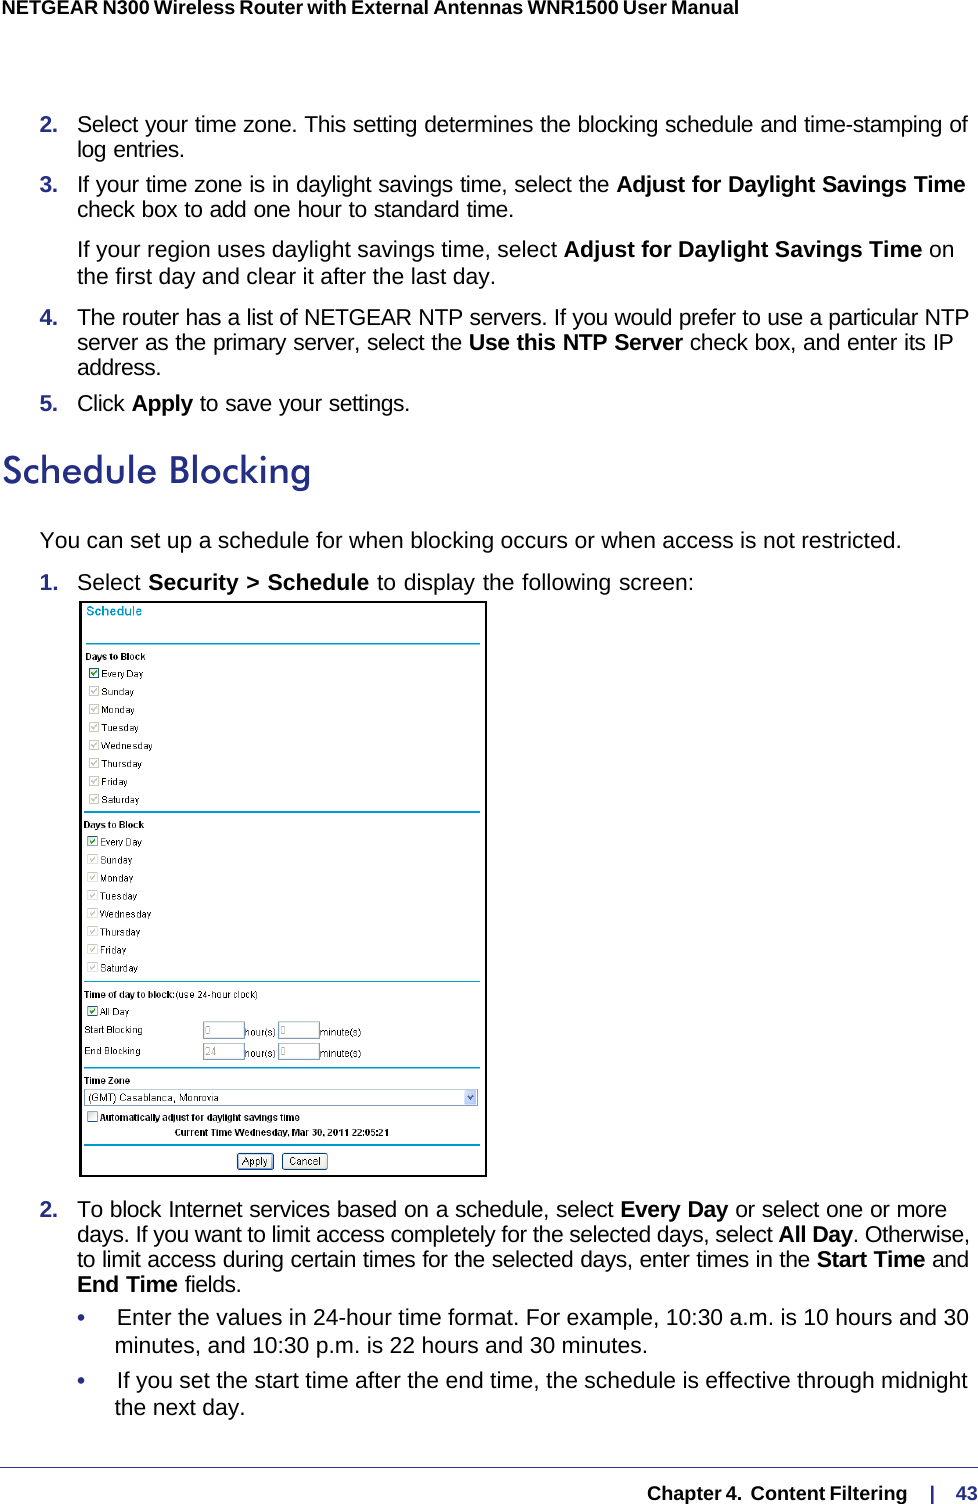   Chapter 4.  Content Filtering     |    43NETGEAR N300 Wireless Router with External Antennas WNR1500 User Manual 2.  Select your time zone. This setting determines the blocking schedule and time-stamping of log entries. 3.  If your time zone is in daylight savings time, select the Adjust for Daylight Savings Time check box to add one hour to standard time.If your region uses daylight savings time, select Adjust for Daylight Savings Time on the first day and clear it after the last day.4.  The router has a list of NETGEAR NTP servers. If you would prefer to use a particular NTP server as the primary server, select the Use this NTP Server check box, and enter its IP address.5.  Click Apply to save your settings.Schedule BlockingYou can set up a schedule for when blocking occurs or when access is not restricted. 1.  Select Security &gt; Schedule to display the following screen:2.  To block Internet services based on a schedule, select Every Day or select one or more days. If you want to limit access completely for the selected days, select All Day. Otherwise, to limit access during certain times for the selected days, enter times in the Start Time and End Time fields.•     Enter the values in 24-hour time format. For example, 10:30 a.m. is 10  hours and 30 minutes, and 10:30 p.m. is 22 hours and 30 minutes. •     If you set the start time after the end time, the schedule is effective through midnight the next day.